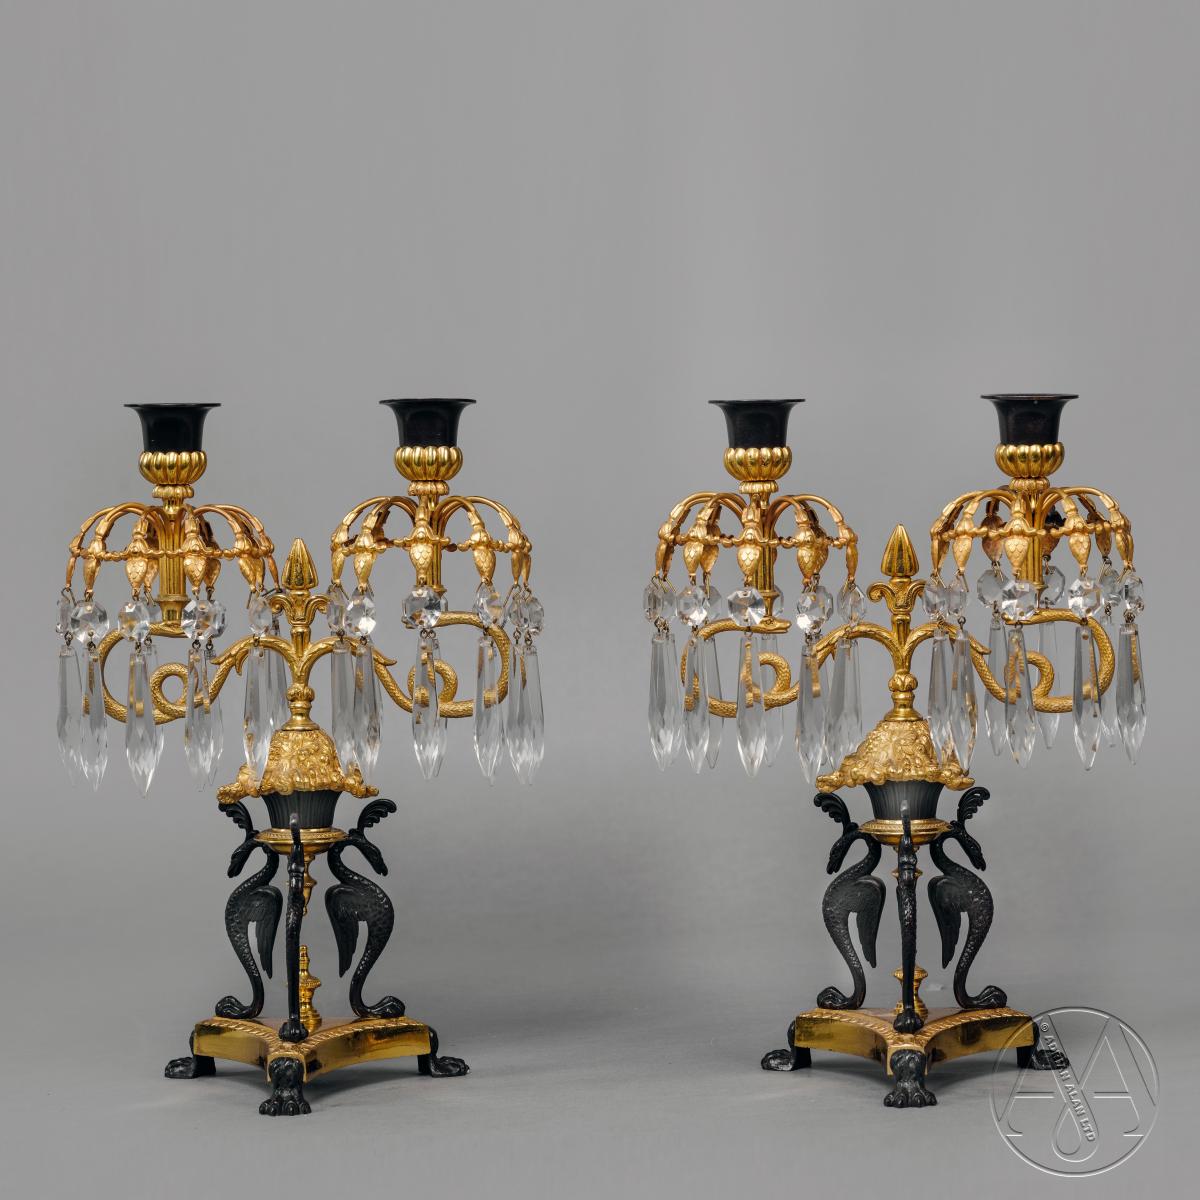 A Pair Of Empire Revival Gilt And Patinated Bronze Twin-Light Lustre Candelabra